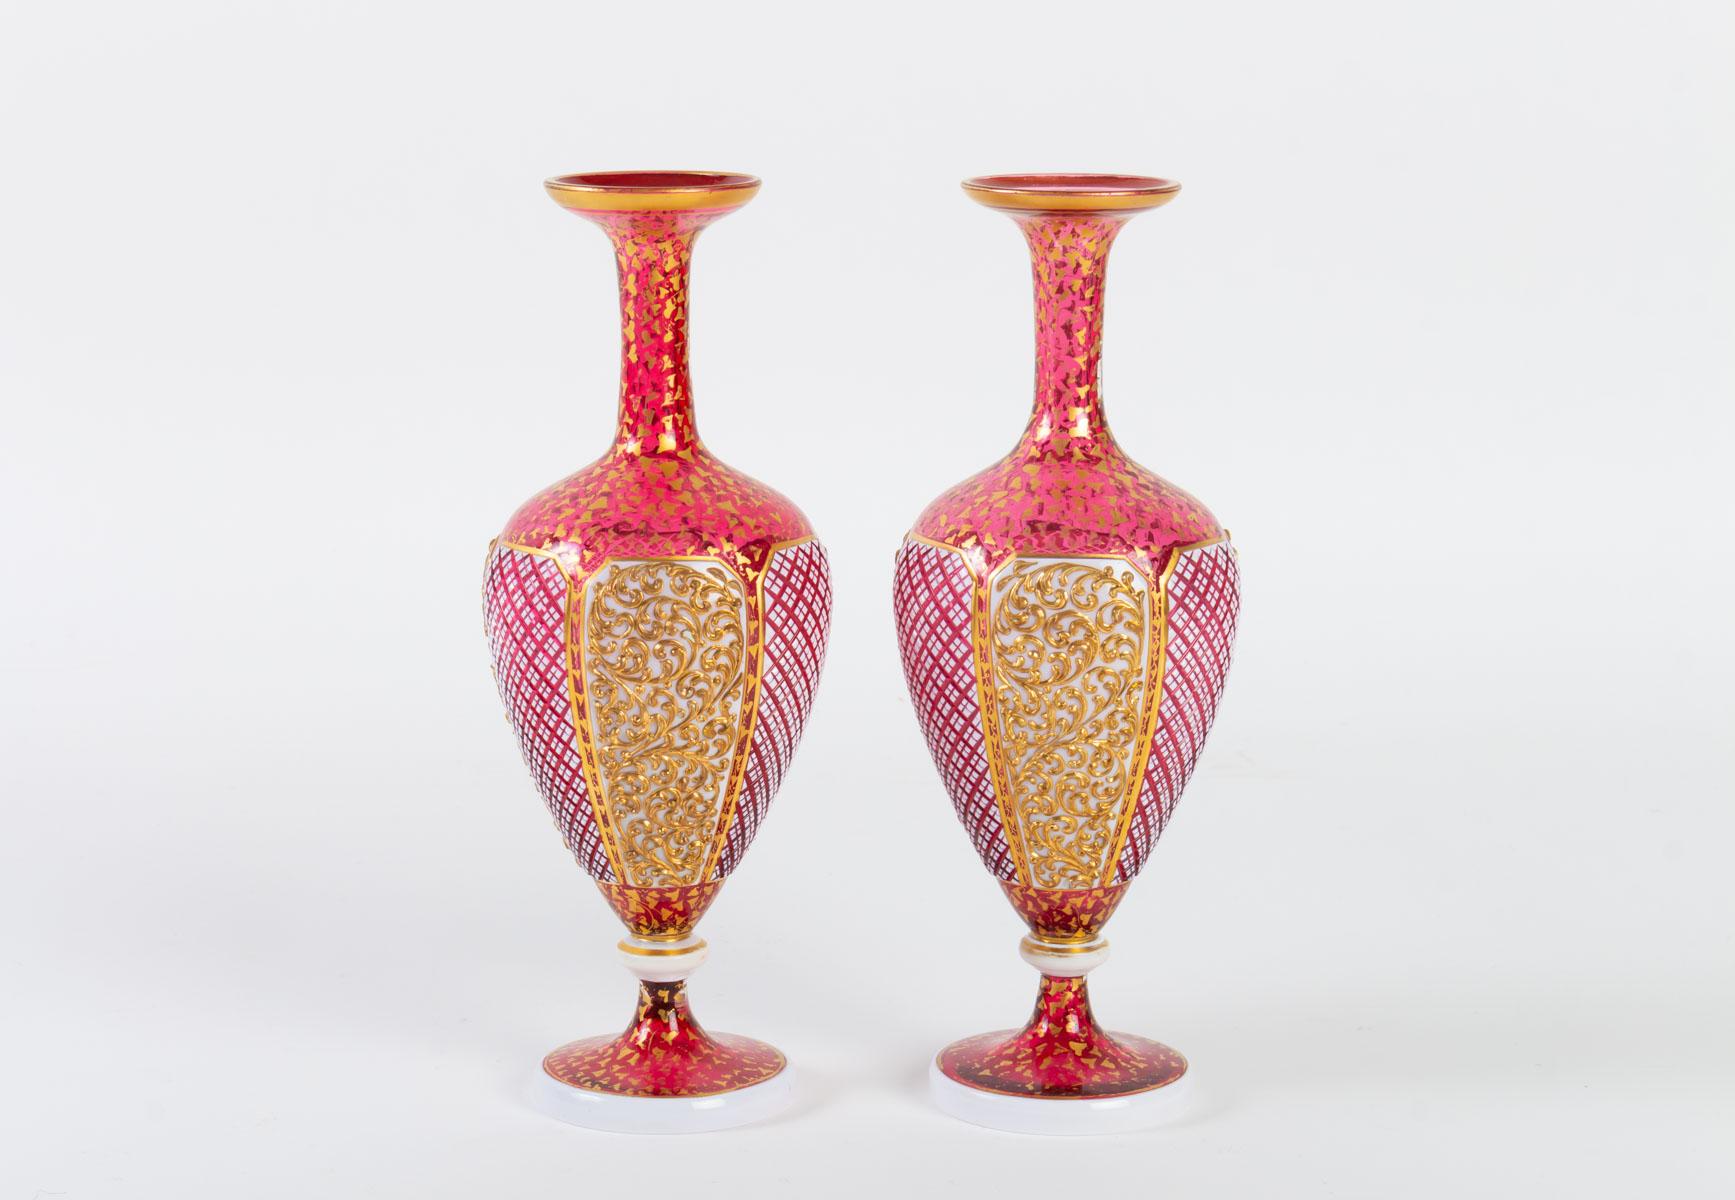 Pair of red, gold and white Bohemian vases, 19th century, Napoleon III
Measures: H 25cm, D 10cm.